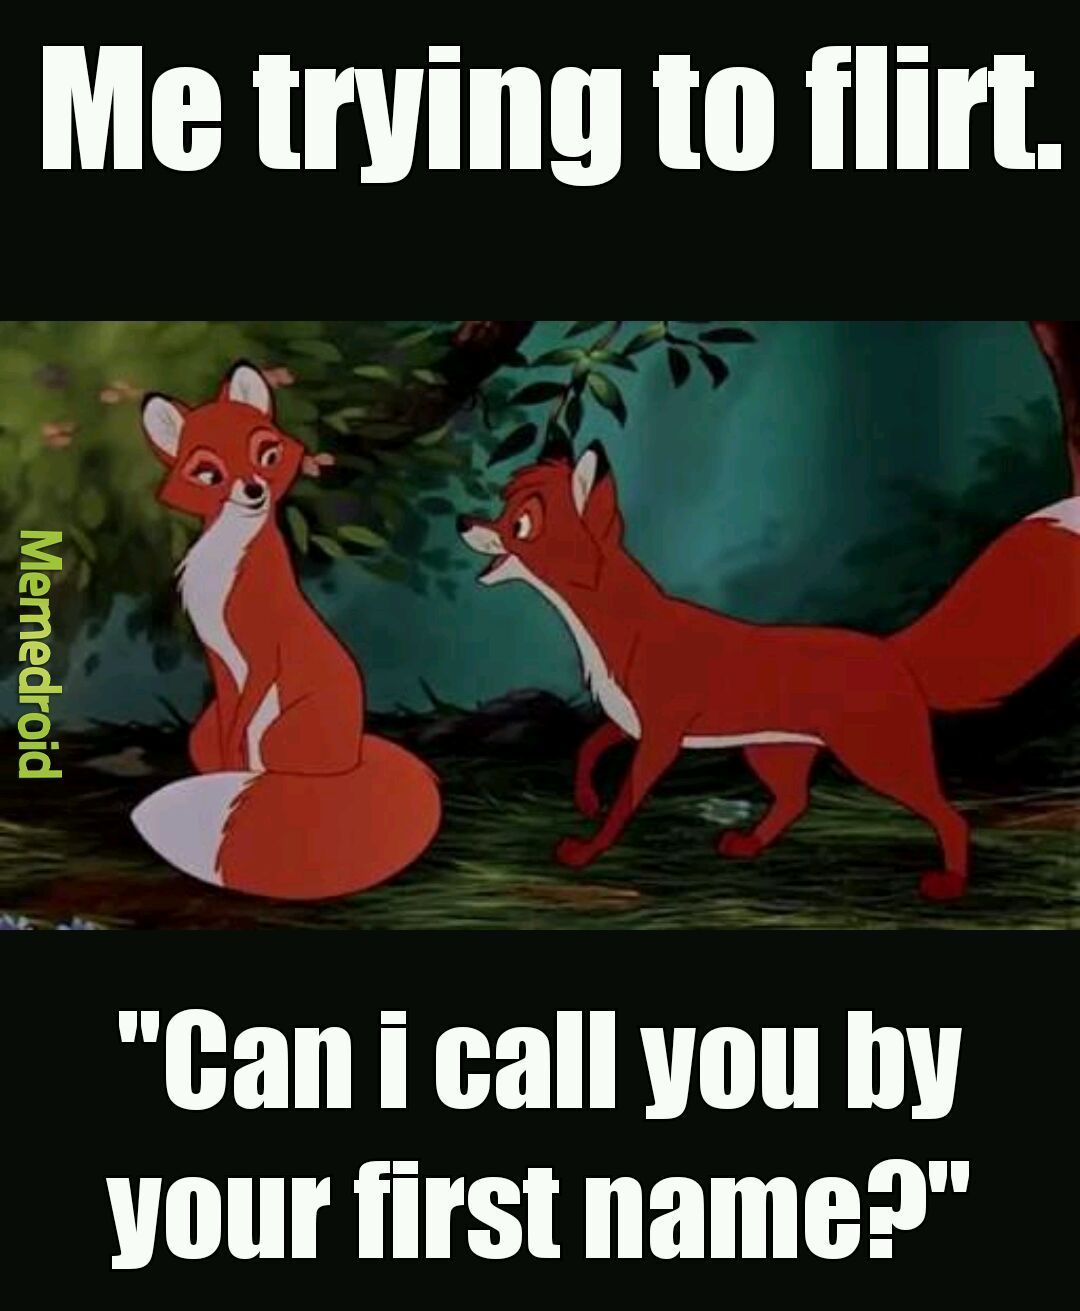 The fox and the hound if you didn't know. Also upvote last comment to 1000 - meme